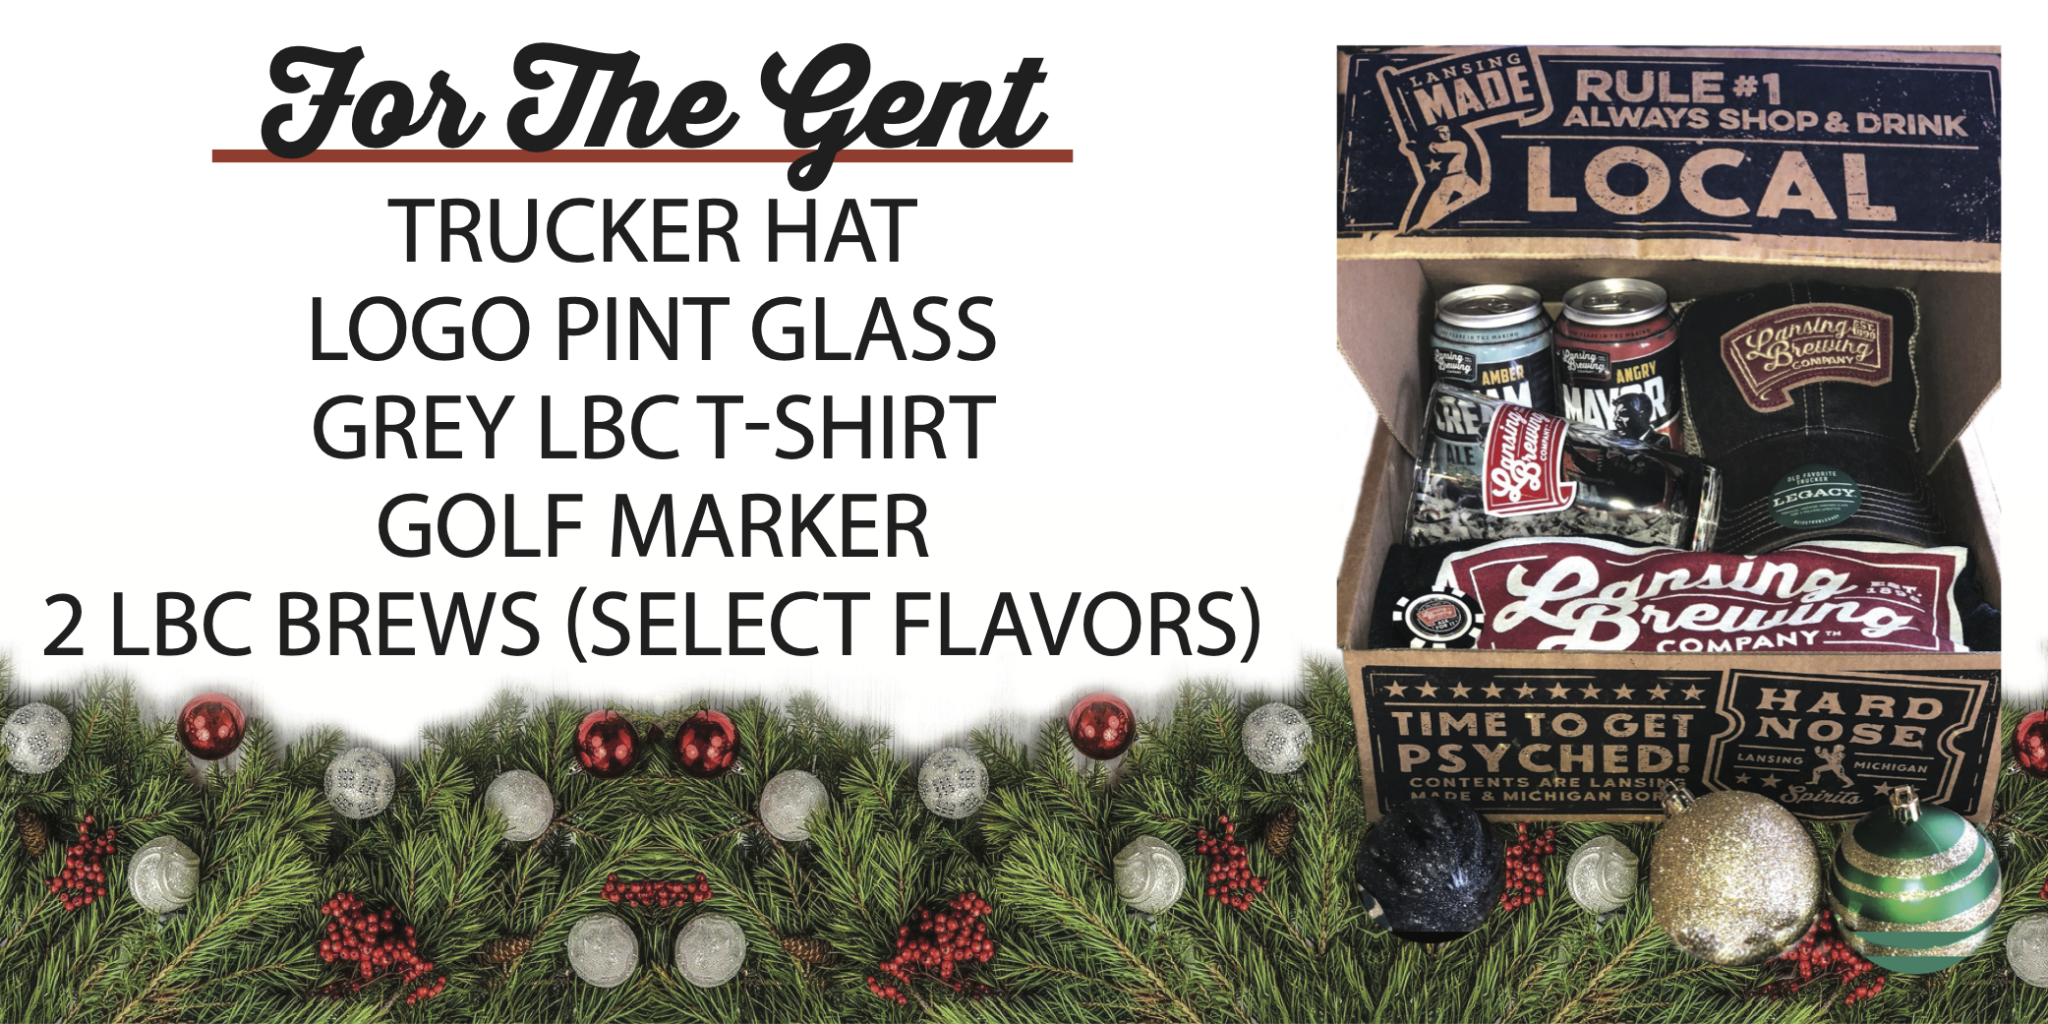 Holiday Gift Boxes at LBC. Trucker hat, pint glass, t-shirt, golf marker, beer